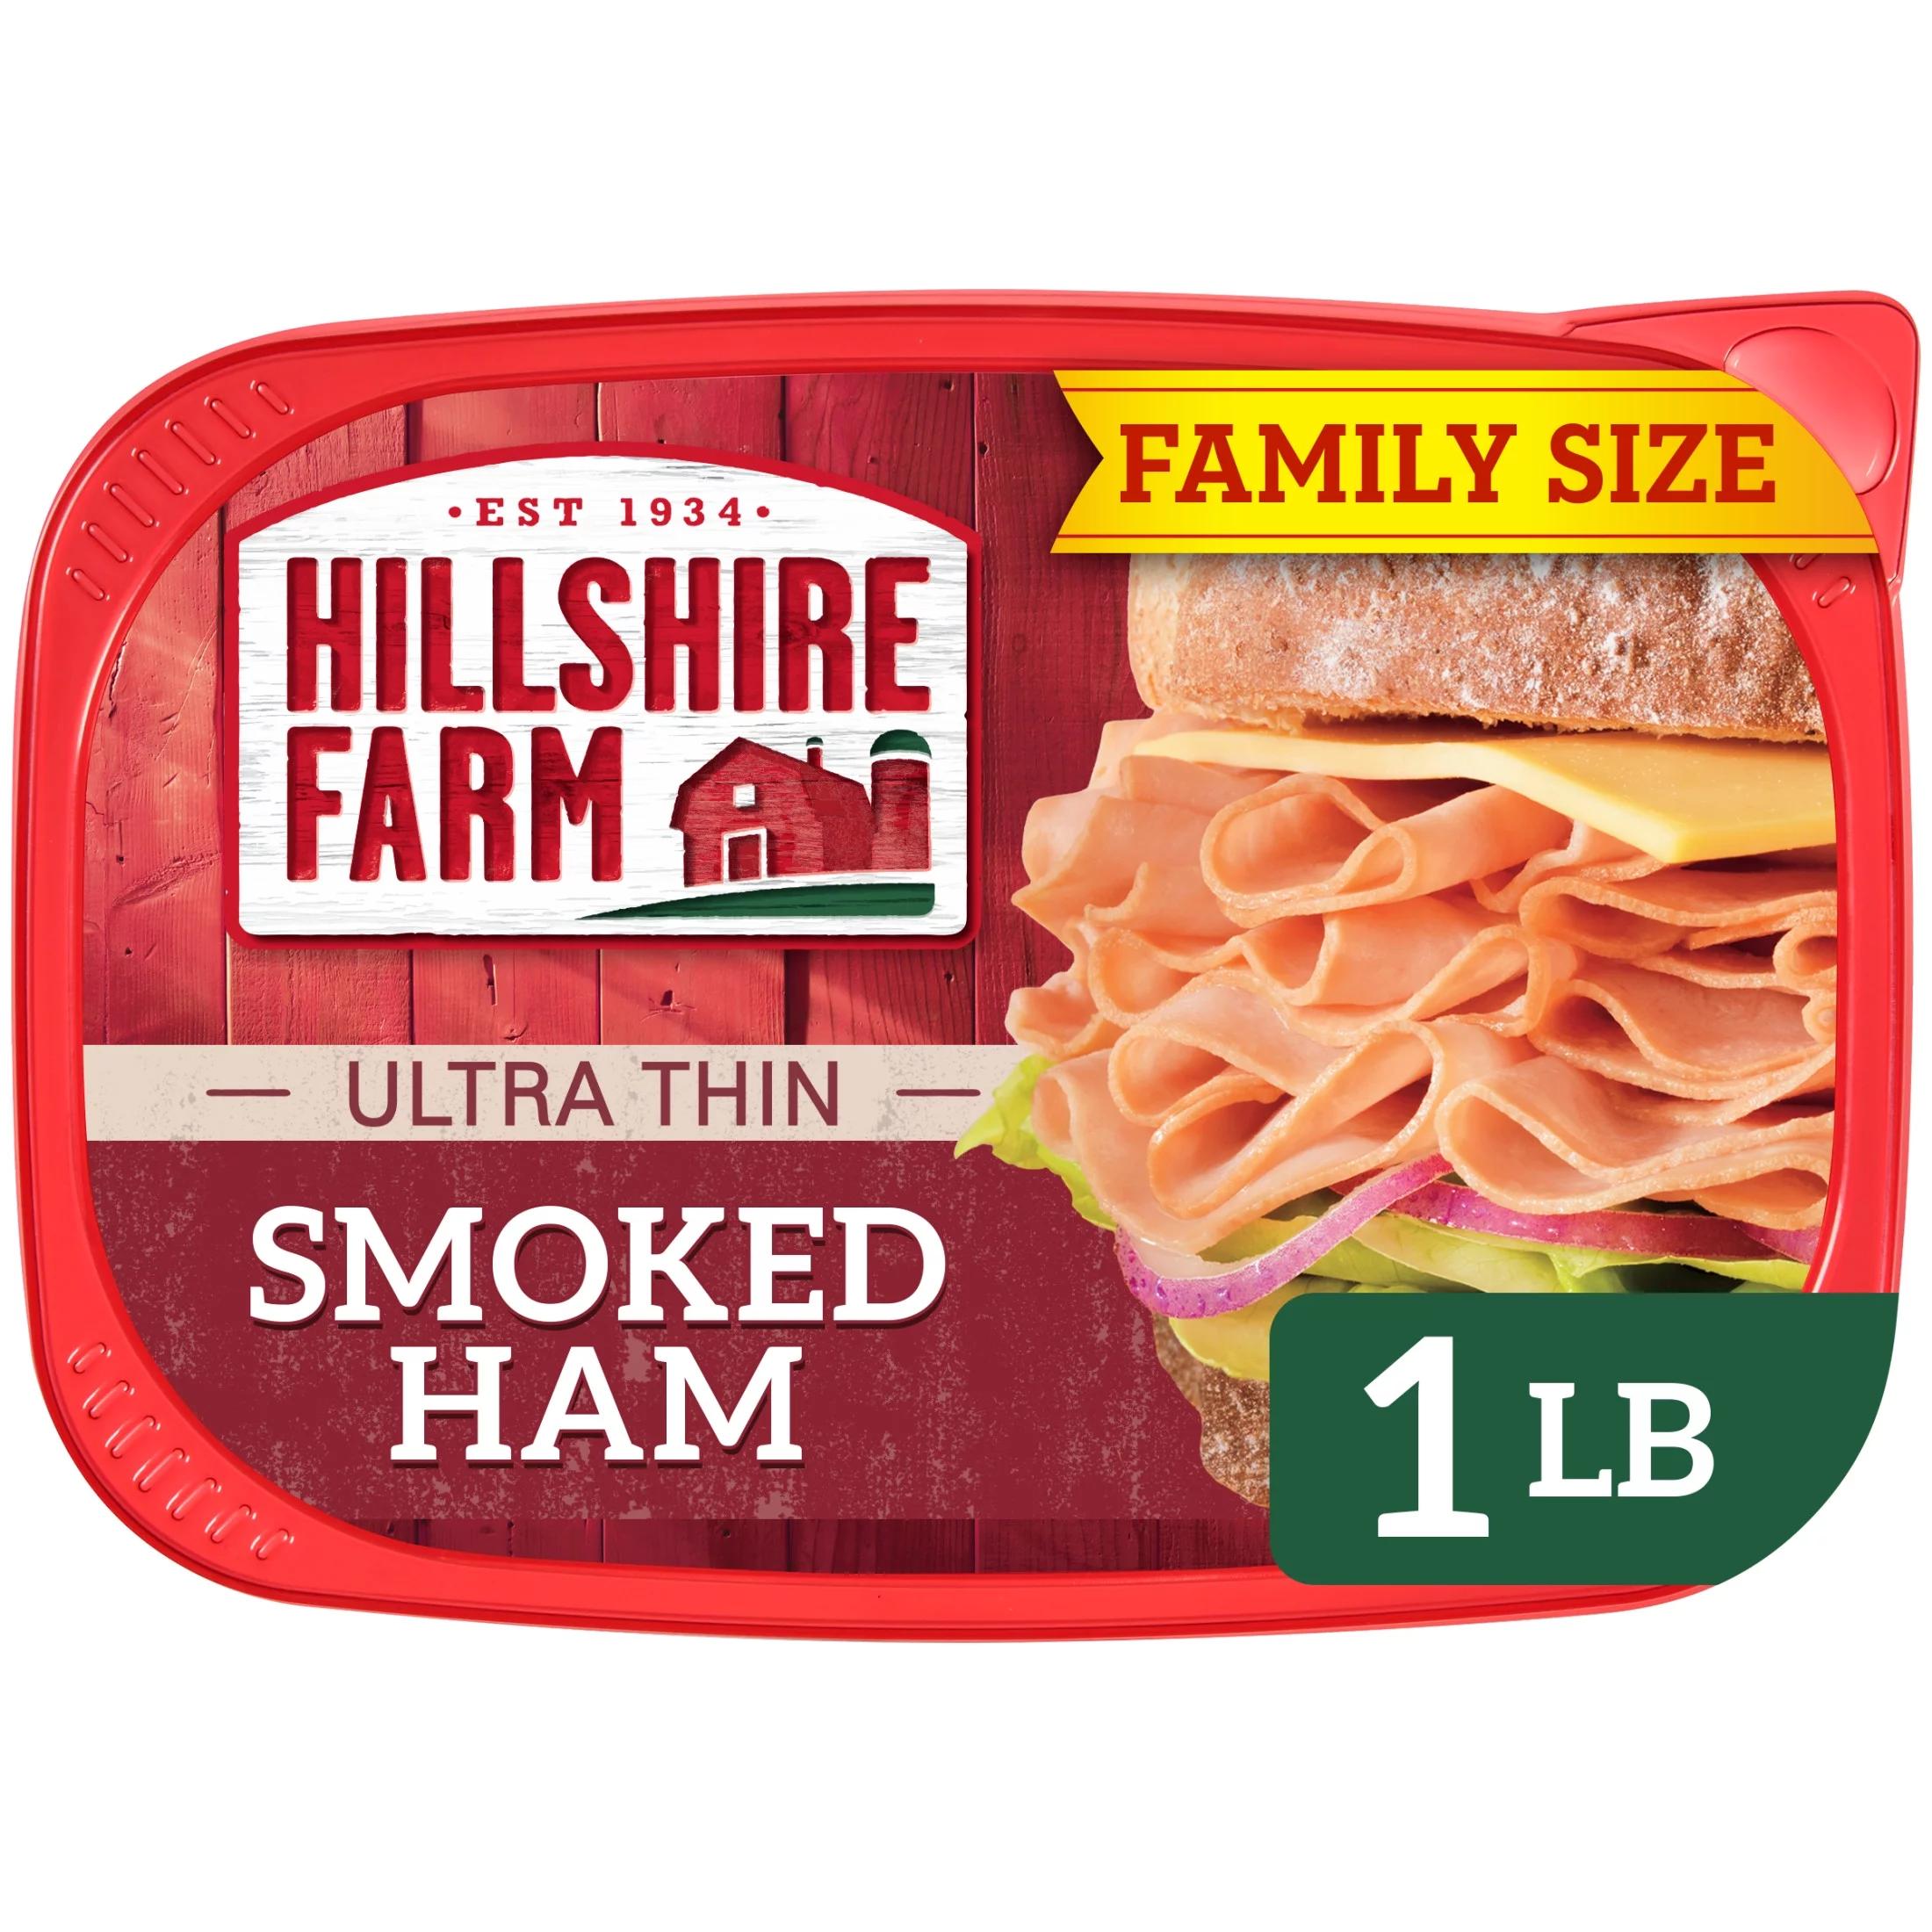 smoked deli ham - What is deli style smoked ham made of